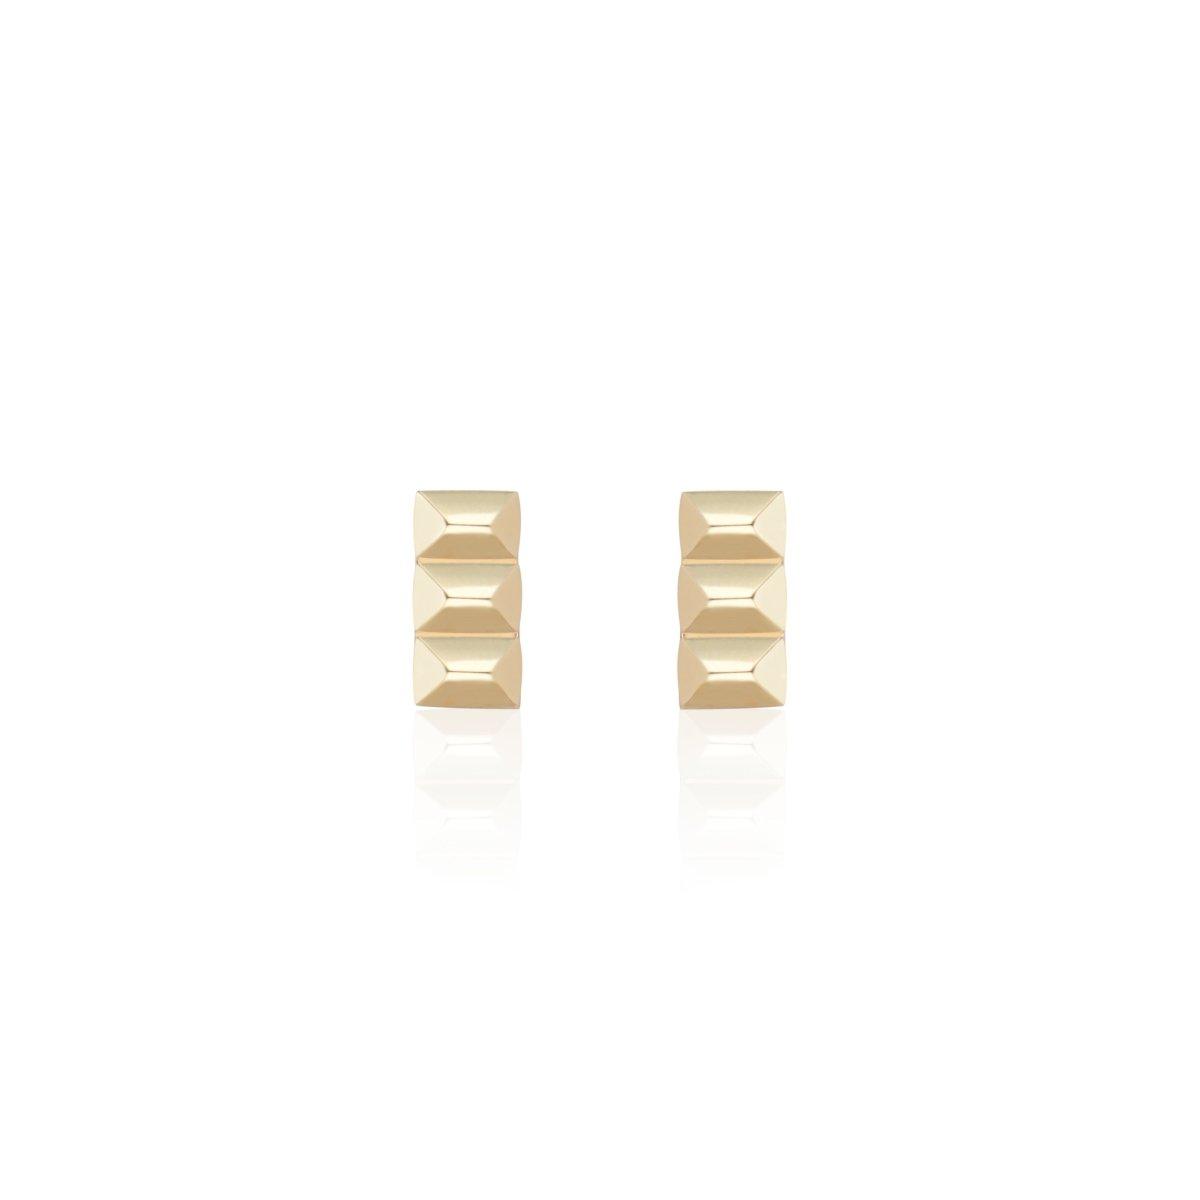 Gold Sparks Fly Bar Studs - Nataly Aponte